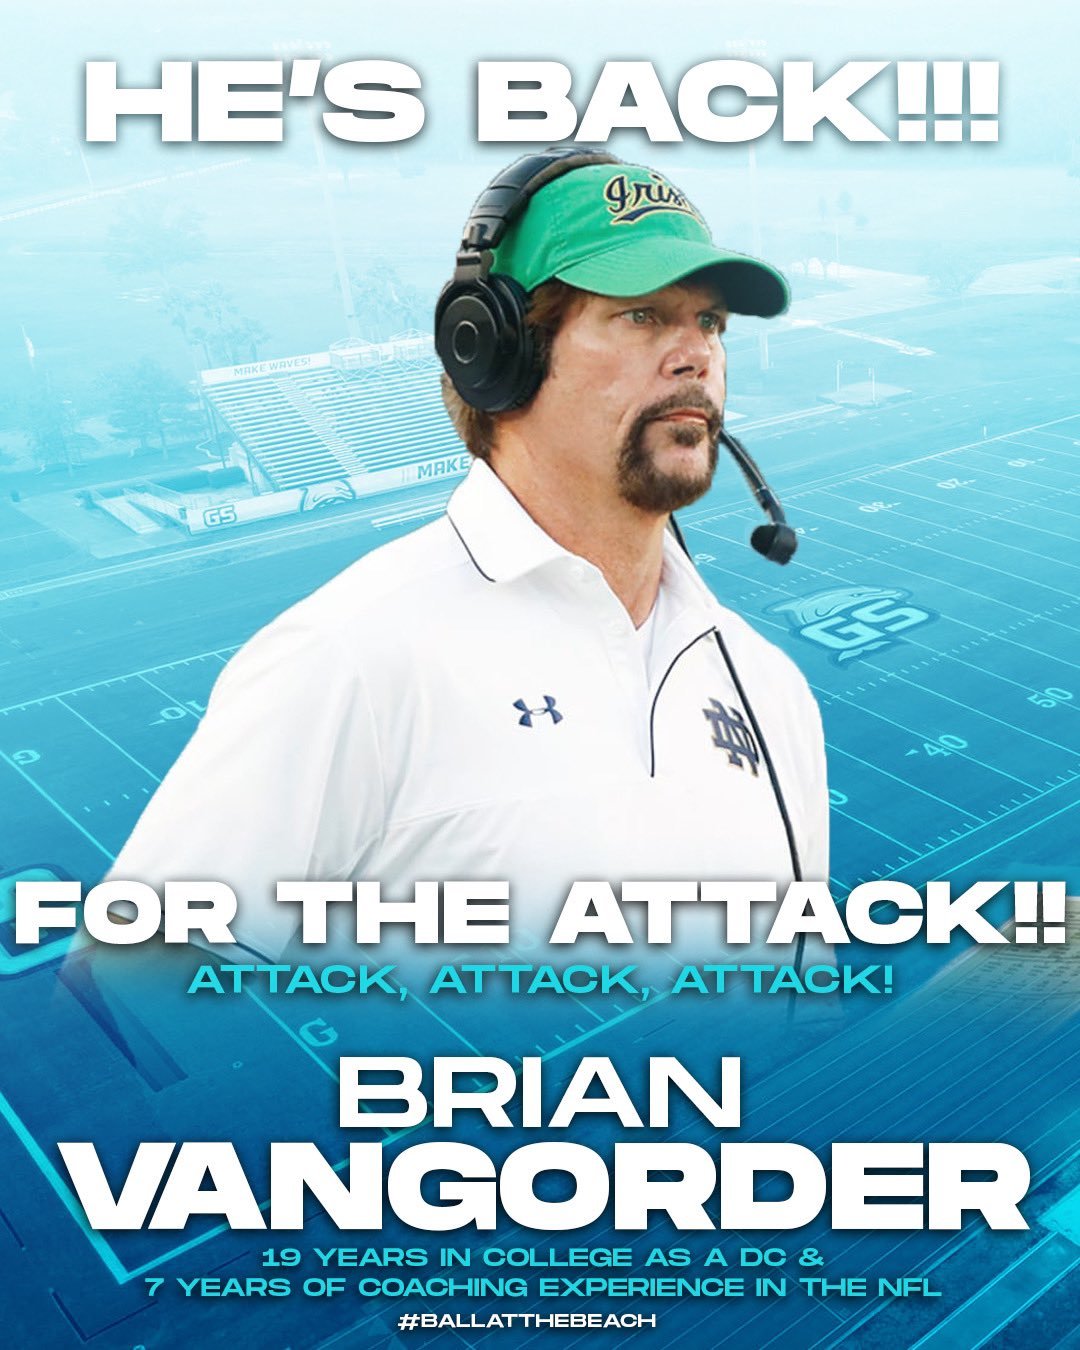 Brian VanGorder was announced as Gulf Shores’ next defensive coordinator Friday, March 10, a year removed from his first stint with the Dolphins. Head coach Mark Hudspeth hired VanGorder as defensive coordinator in his first season at Gulf Shores and the Dolphins allowed the fewest points in program history.